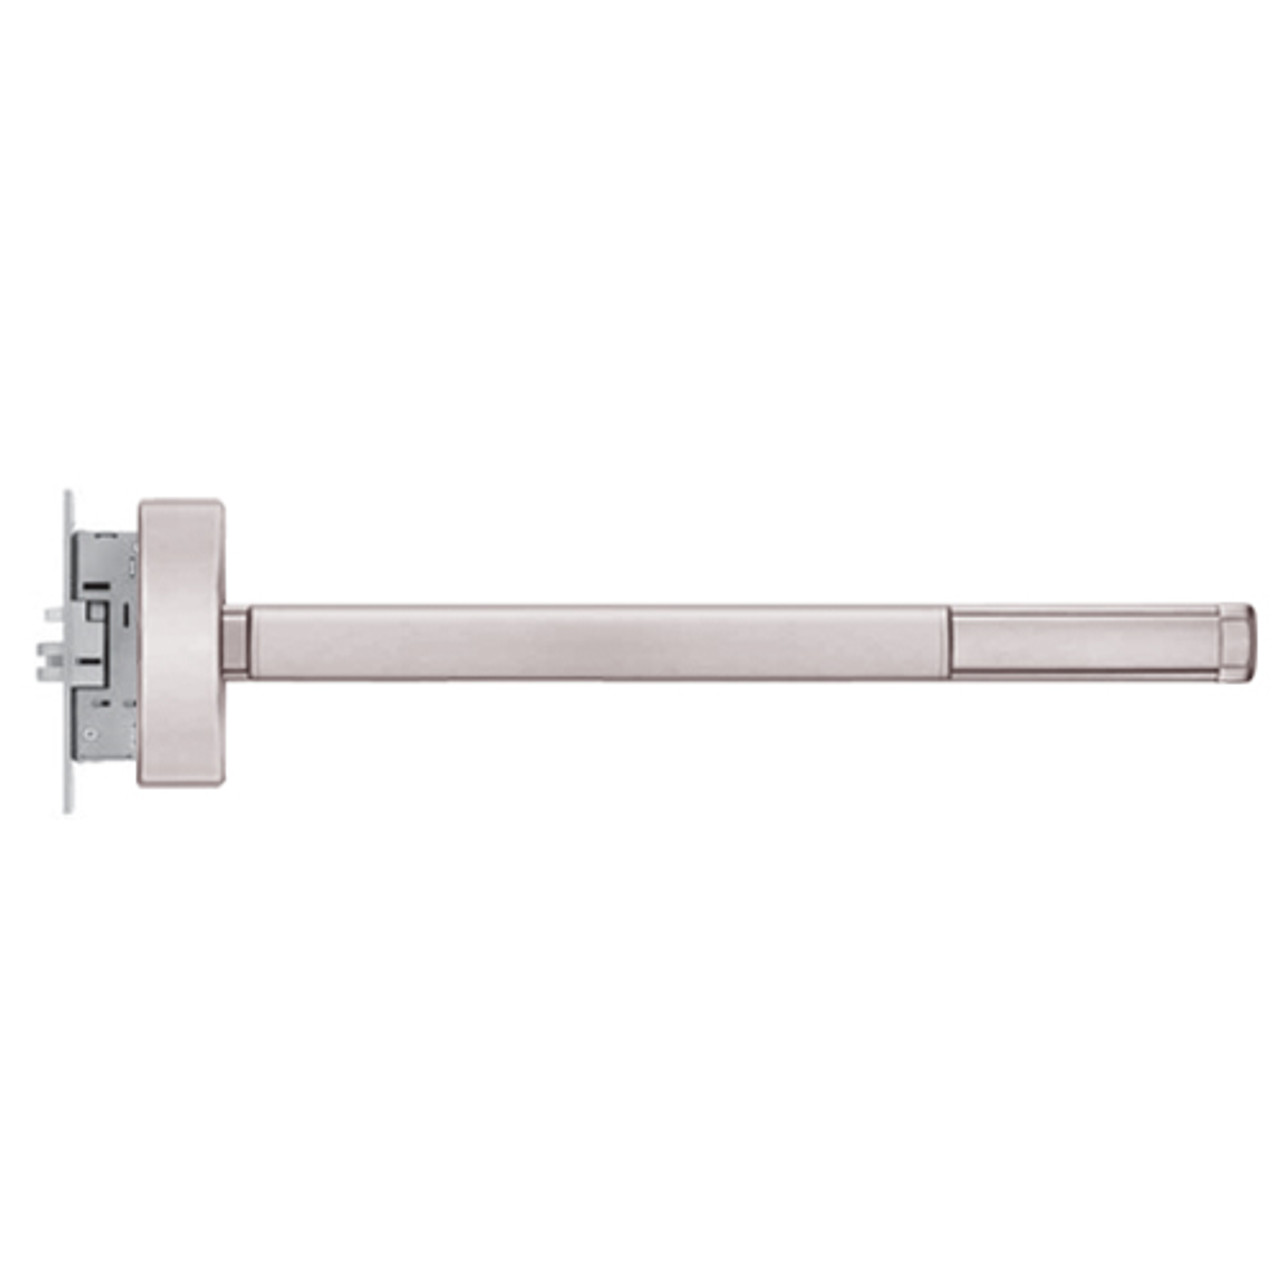 MLRFL2303-LHR-628-48 PHI 2300 Series Fire Rated Apex Mortise Exit Device with Motorized Latch Retraction Prepped for Key Retracts Latchbolt in Satin Aluminum Finish